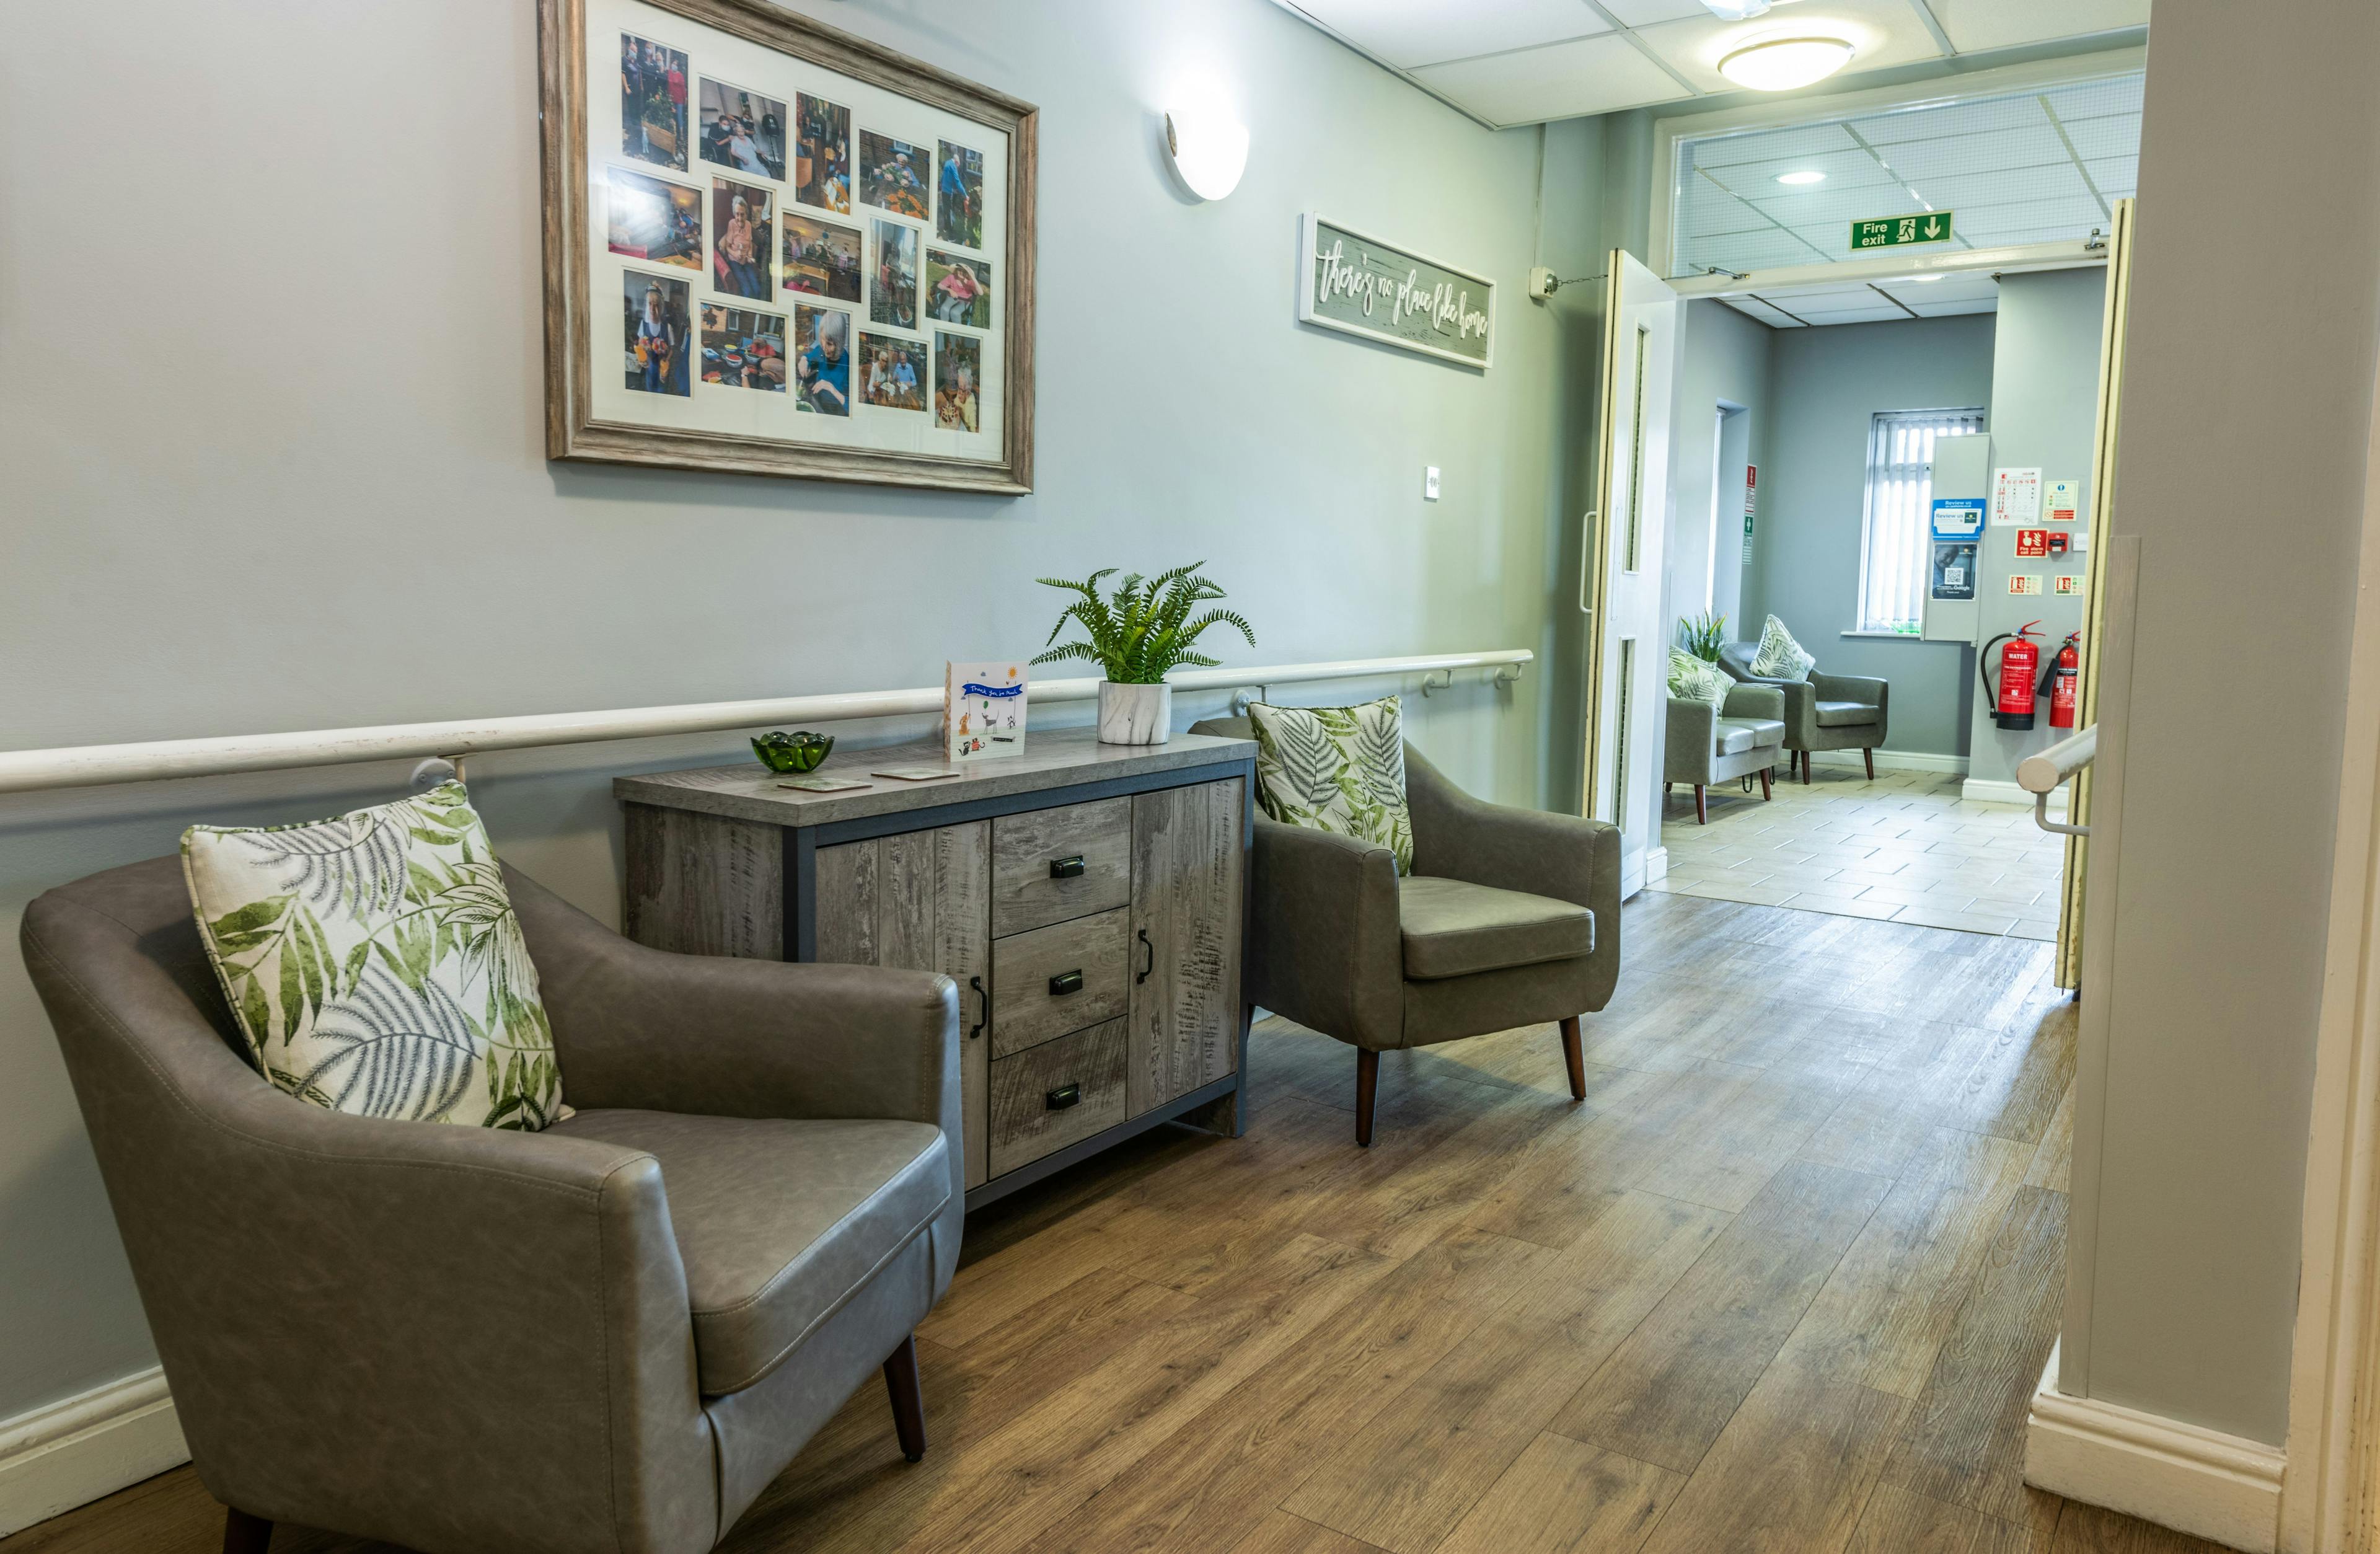 Millennium Care - Norley Hall care home 2